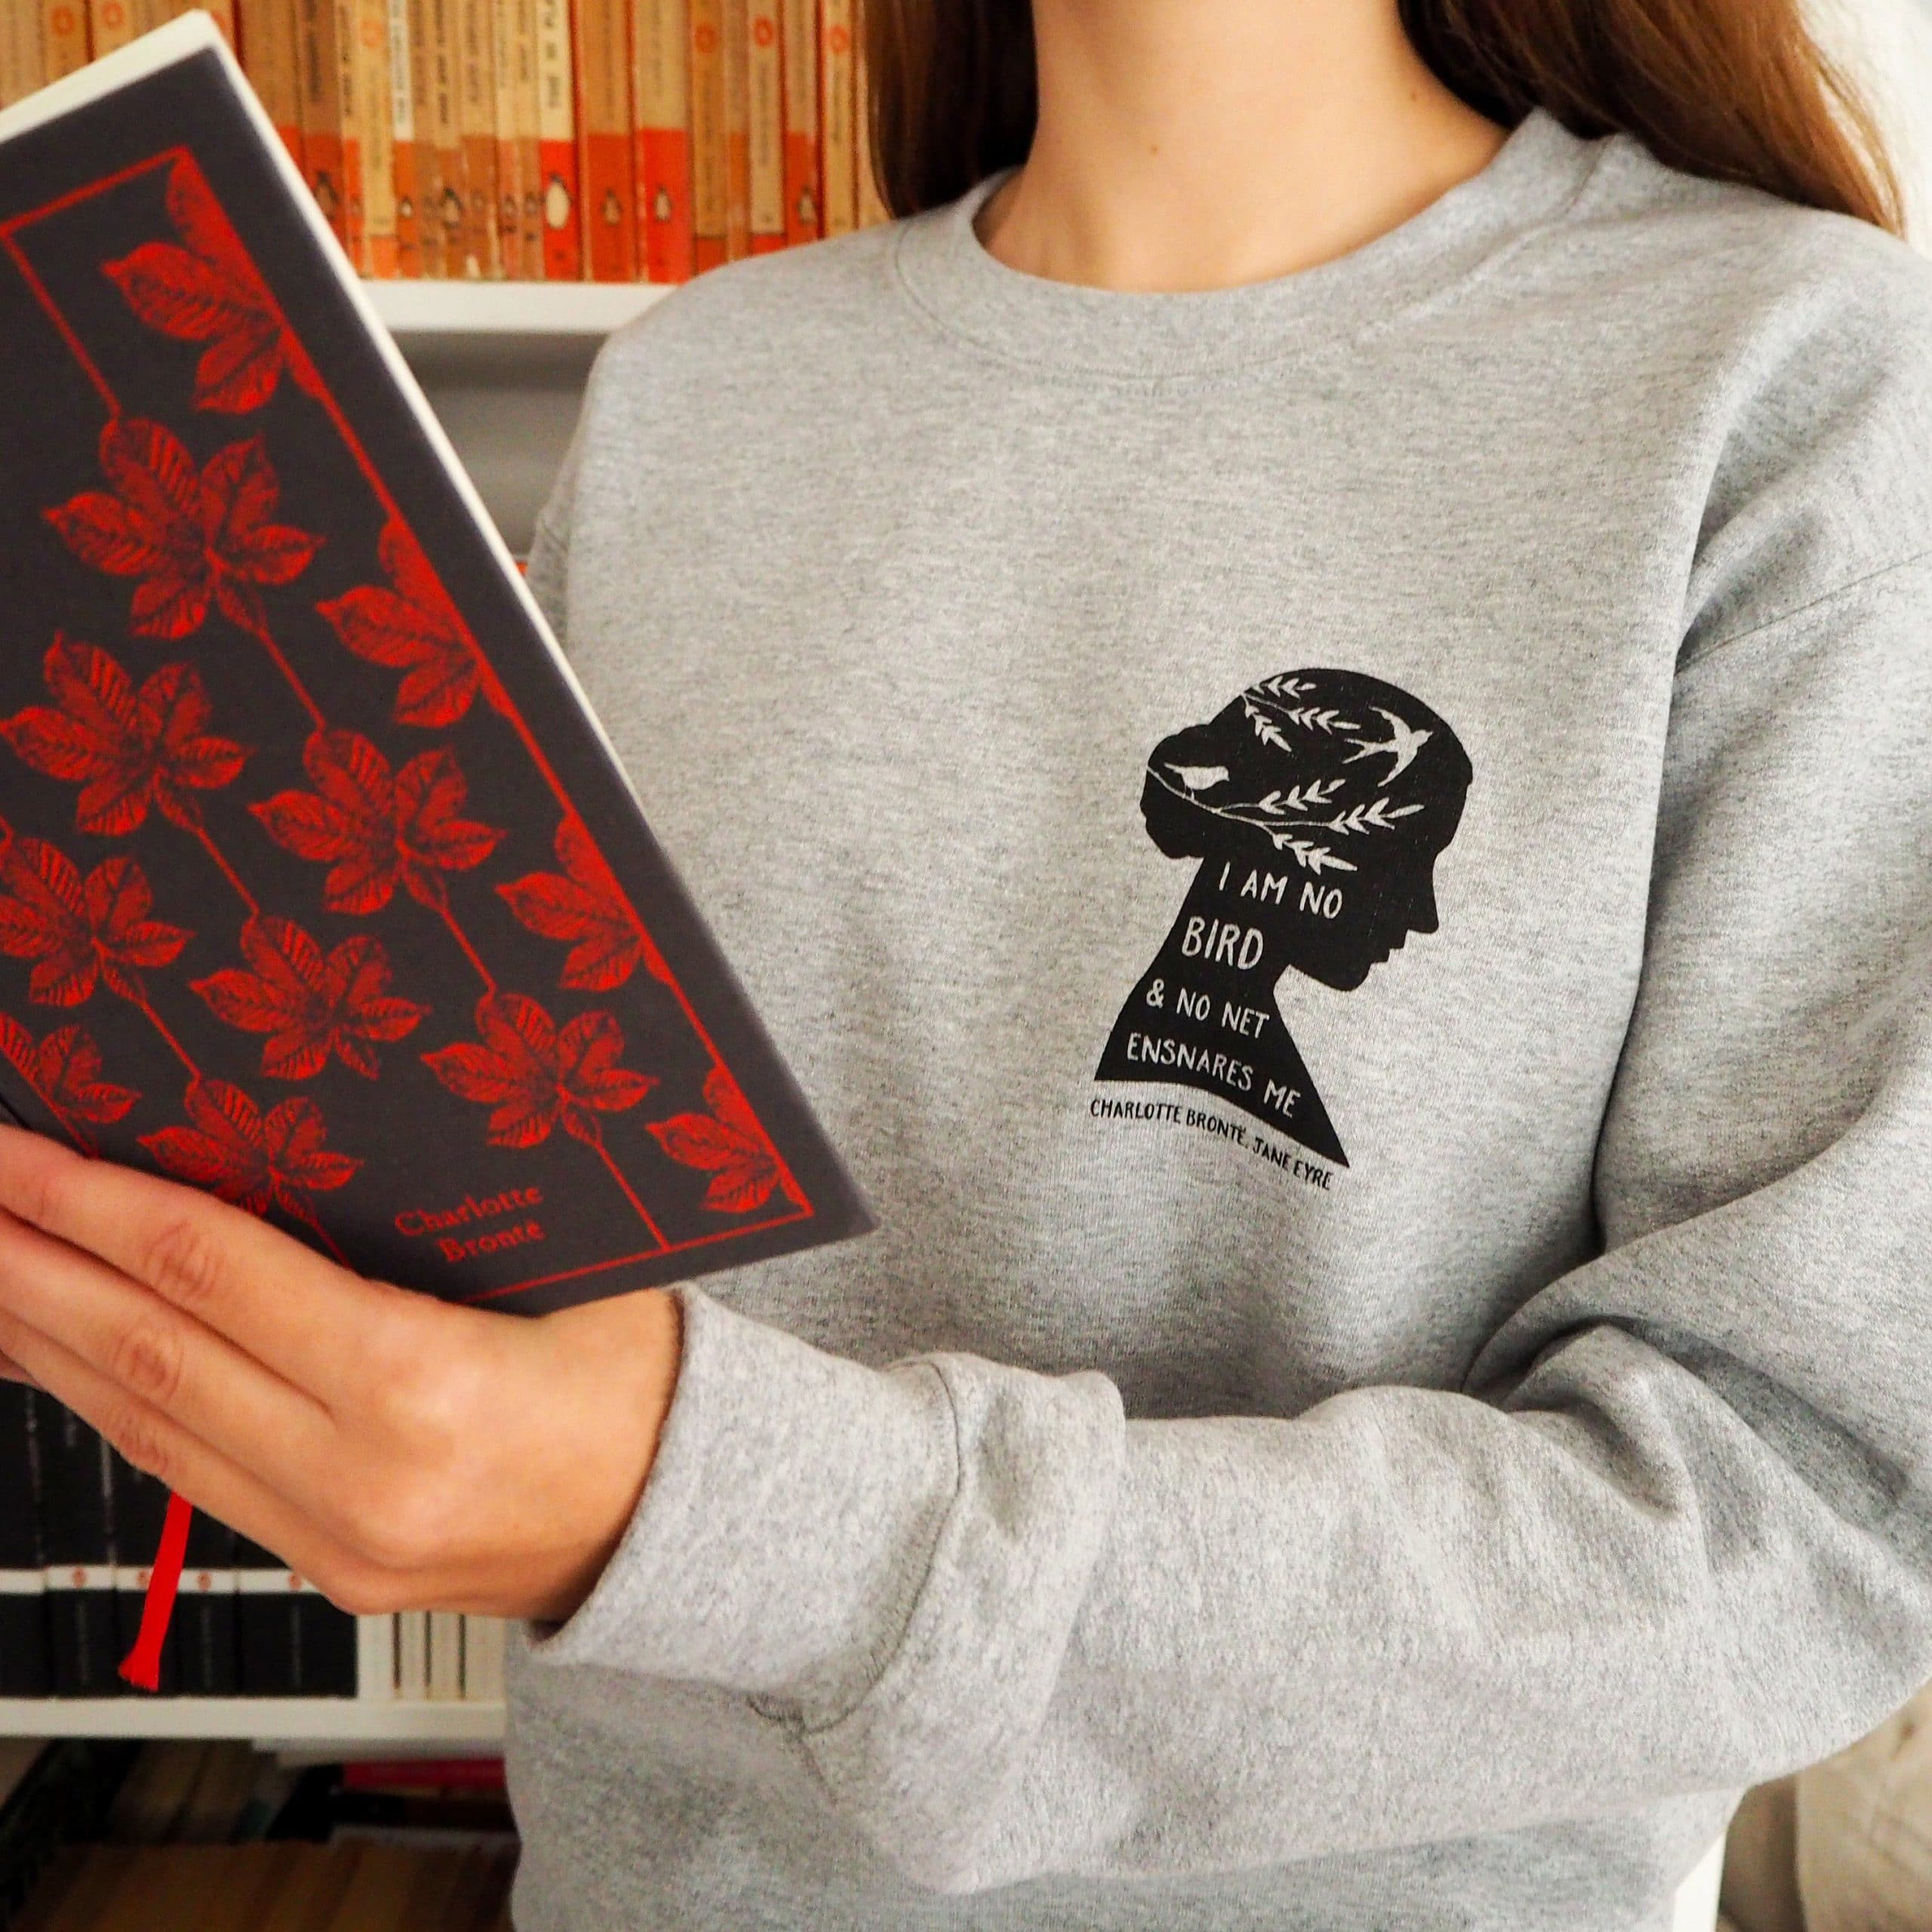 gift ideas for readers: sweatshirt with book verses